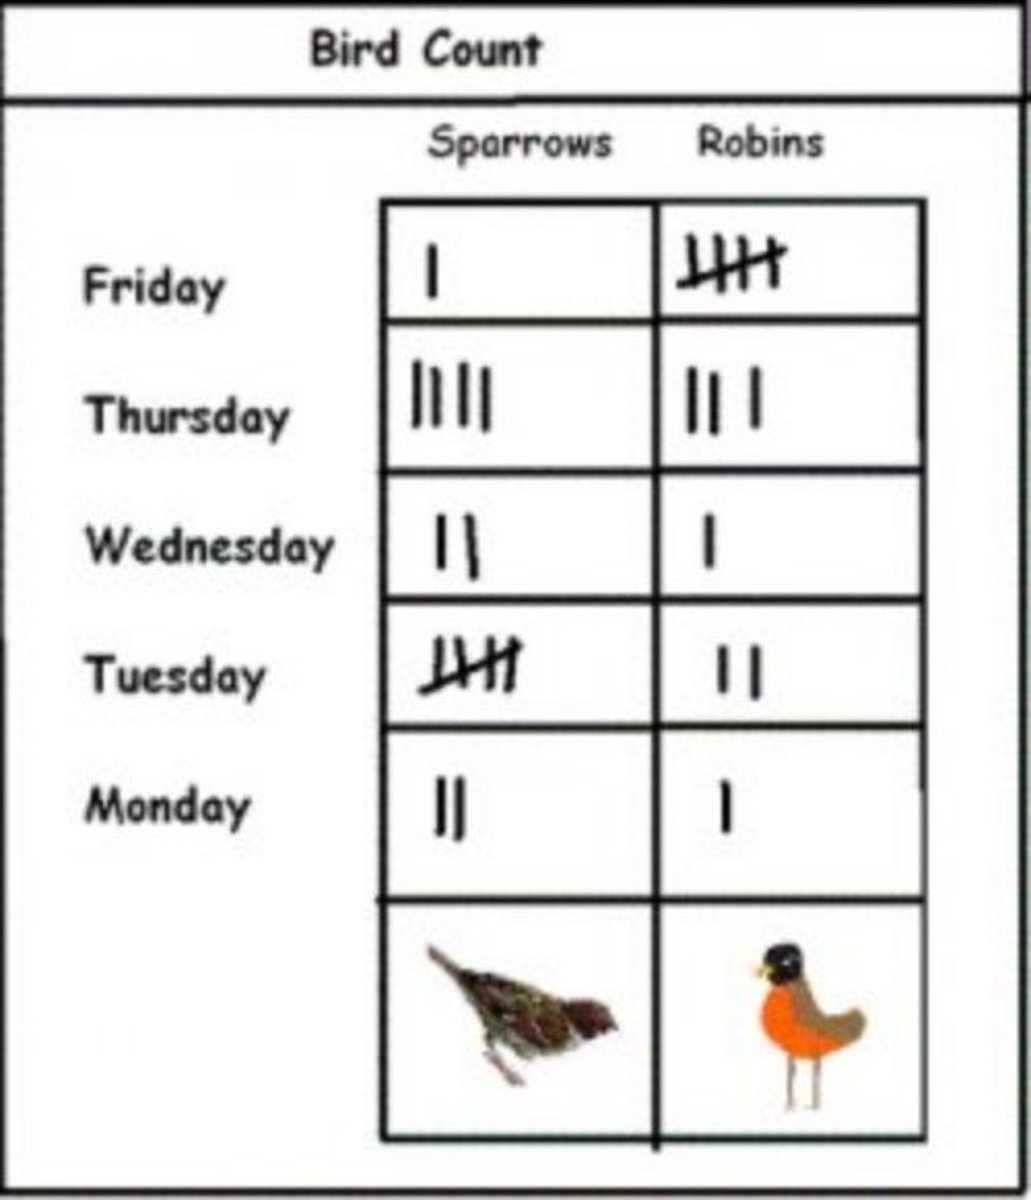 Tally Chart Lesson